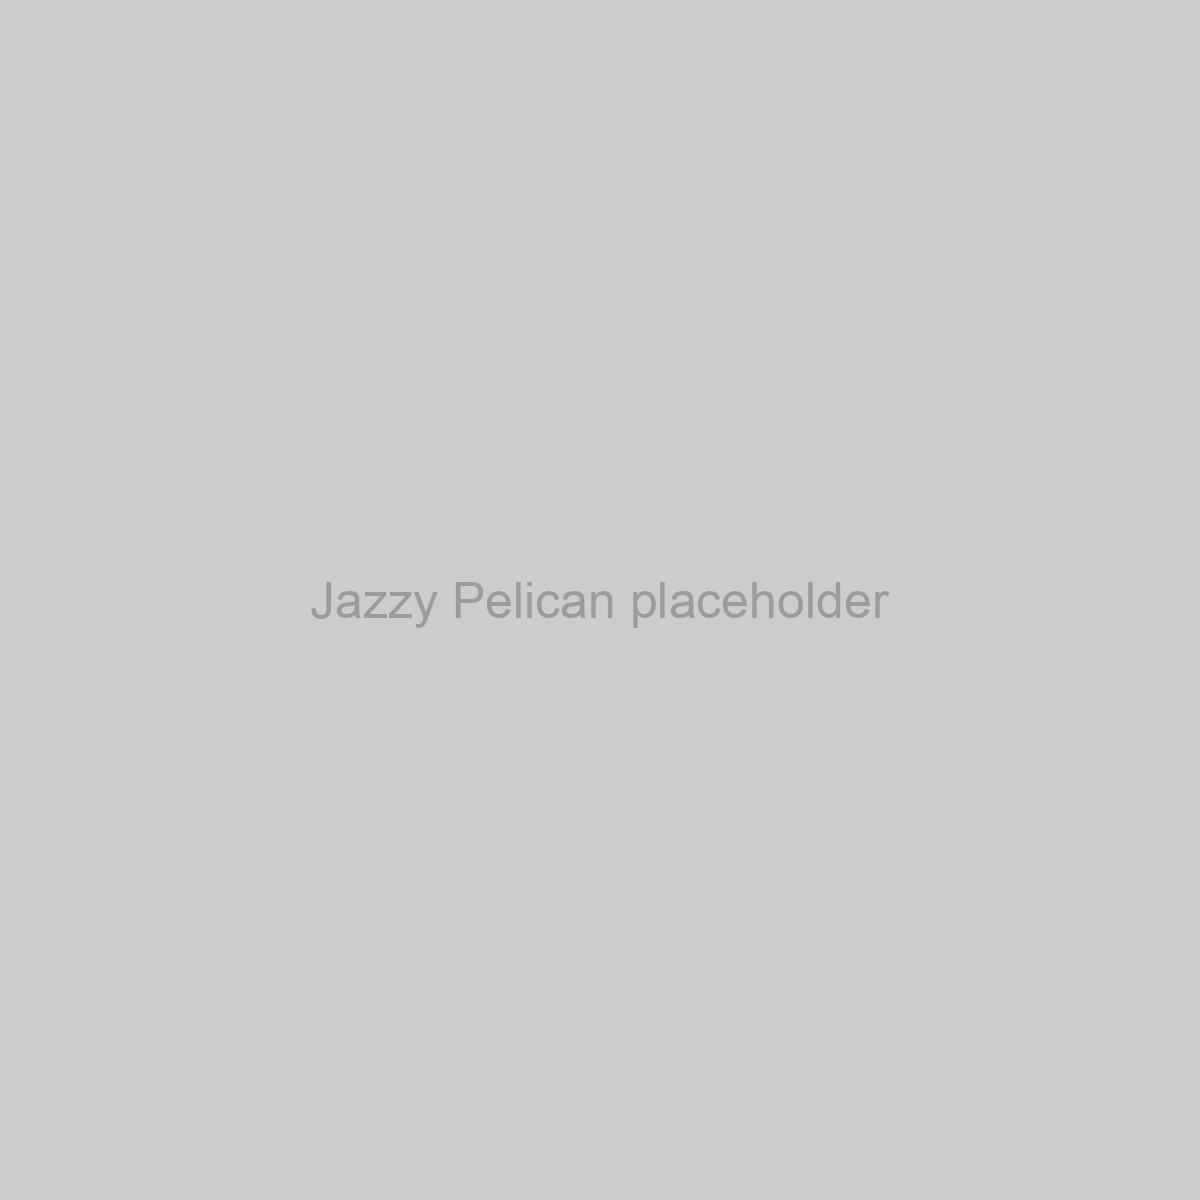 Jazzy Pelican Placeholder Image